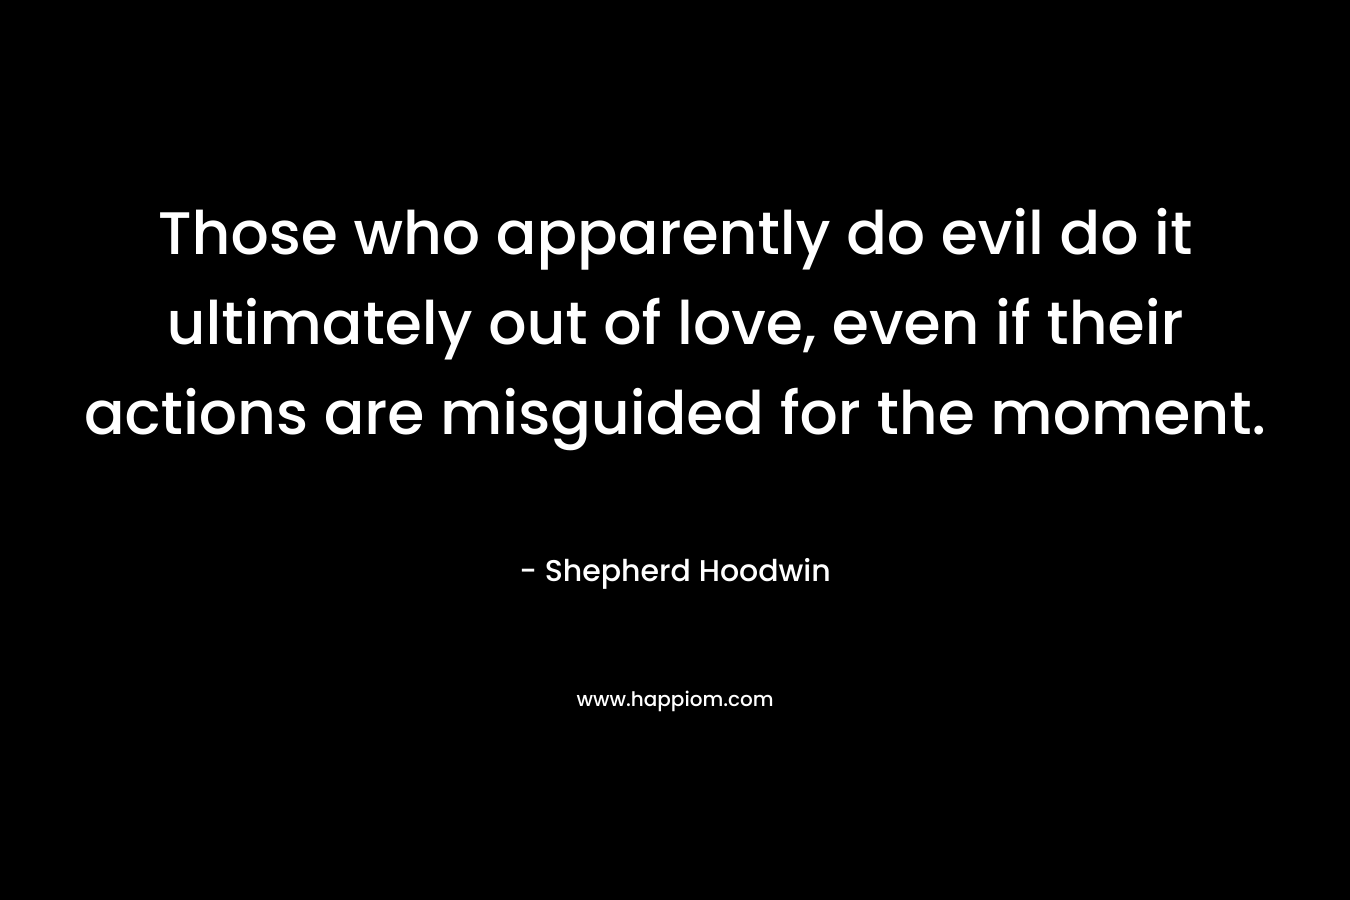 Those who apparently do evil do it ultimately out of love, even if their actions are misguided for the moment. – Shepherd Hoodwin